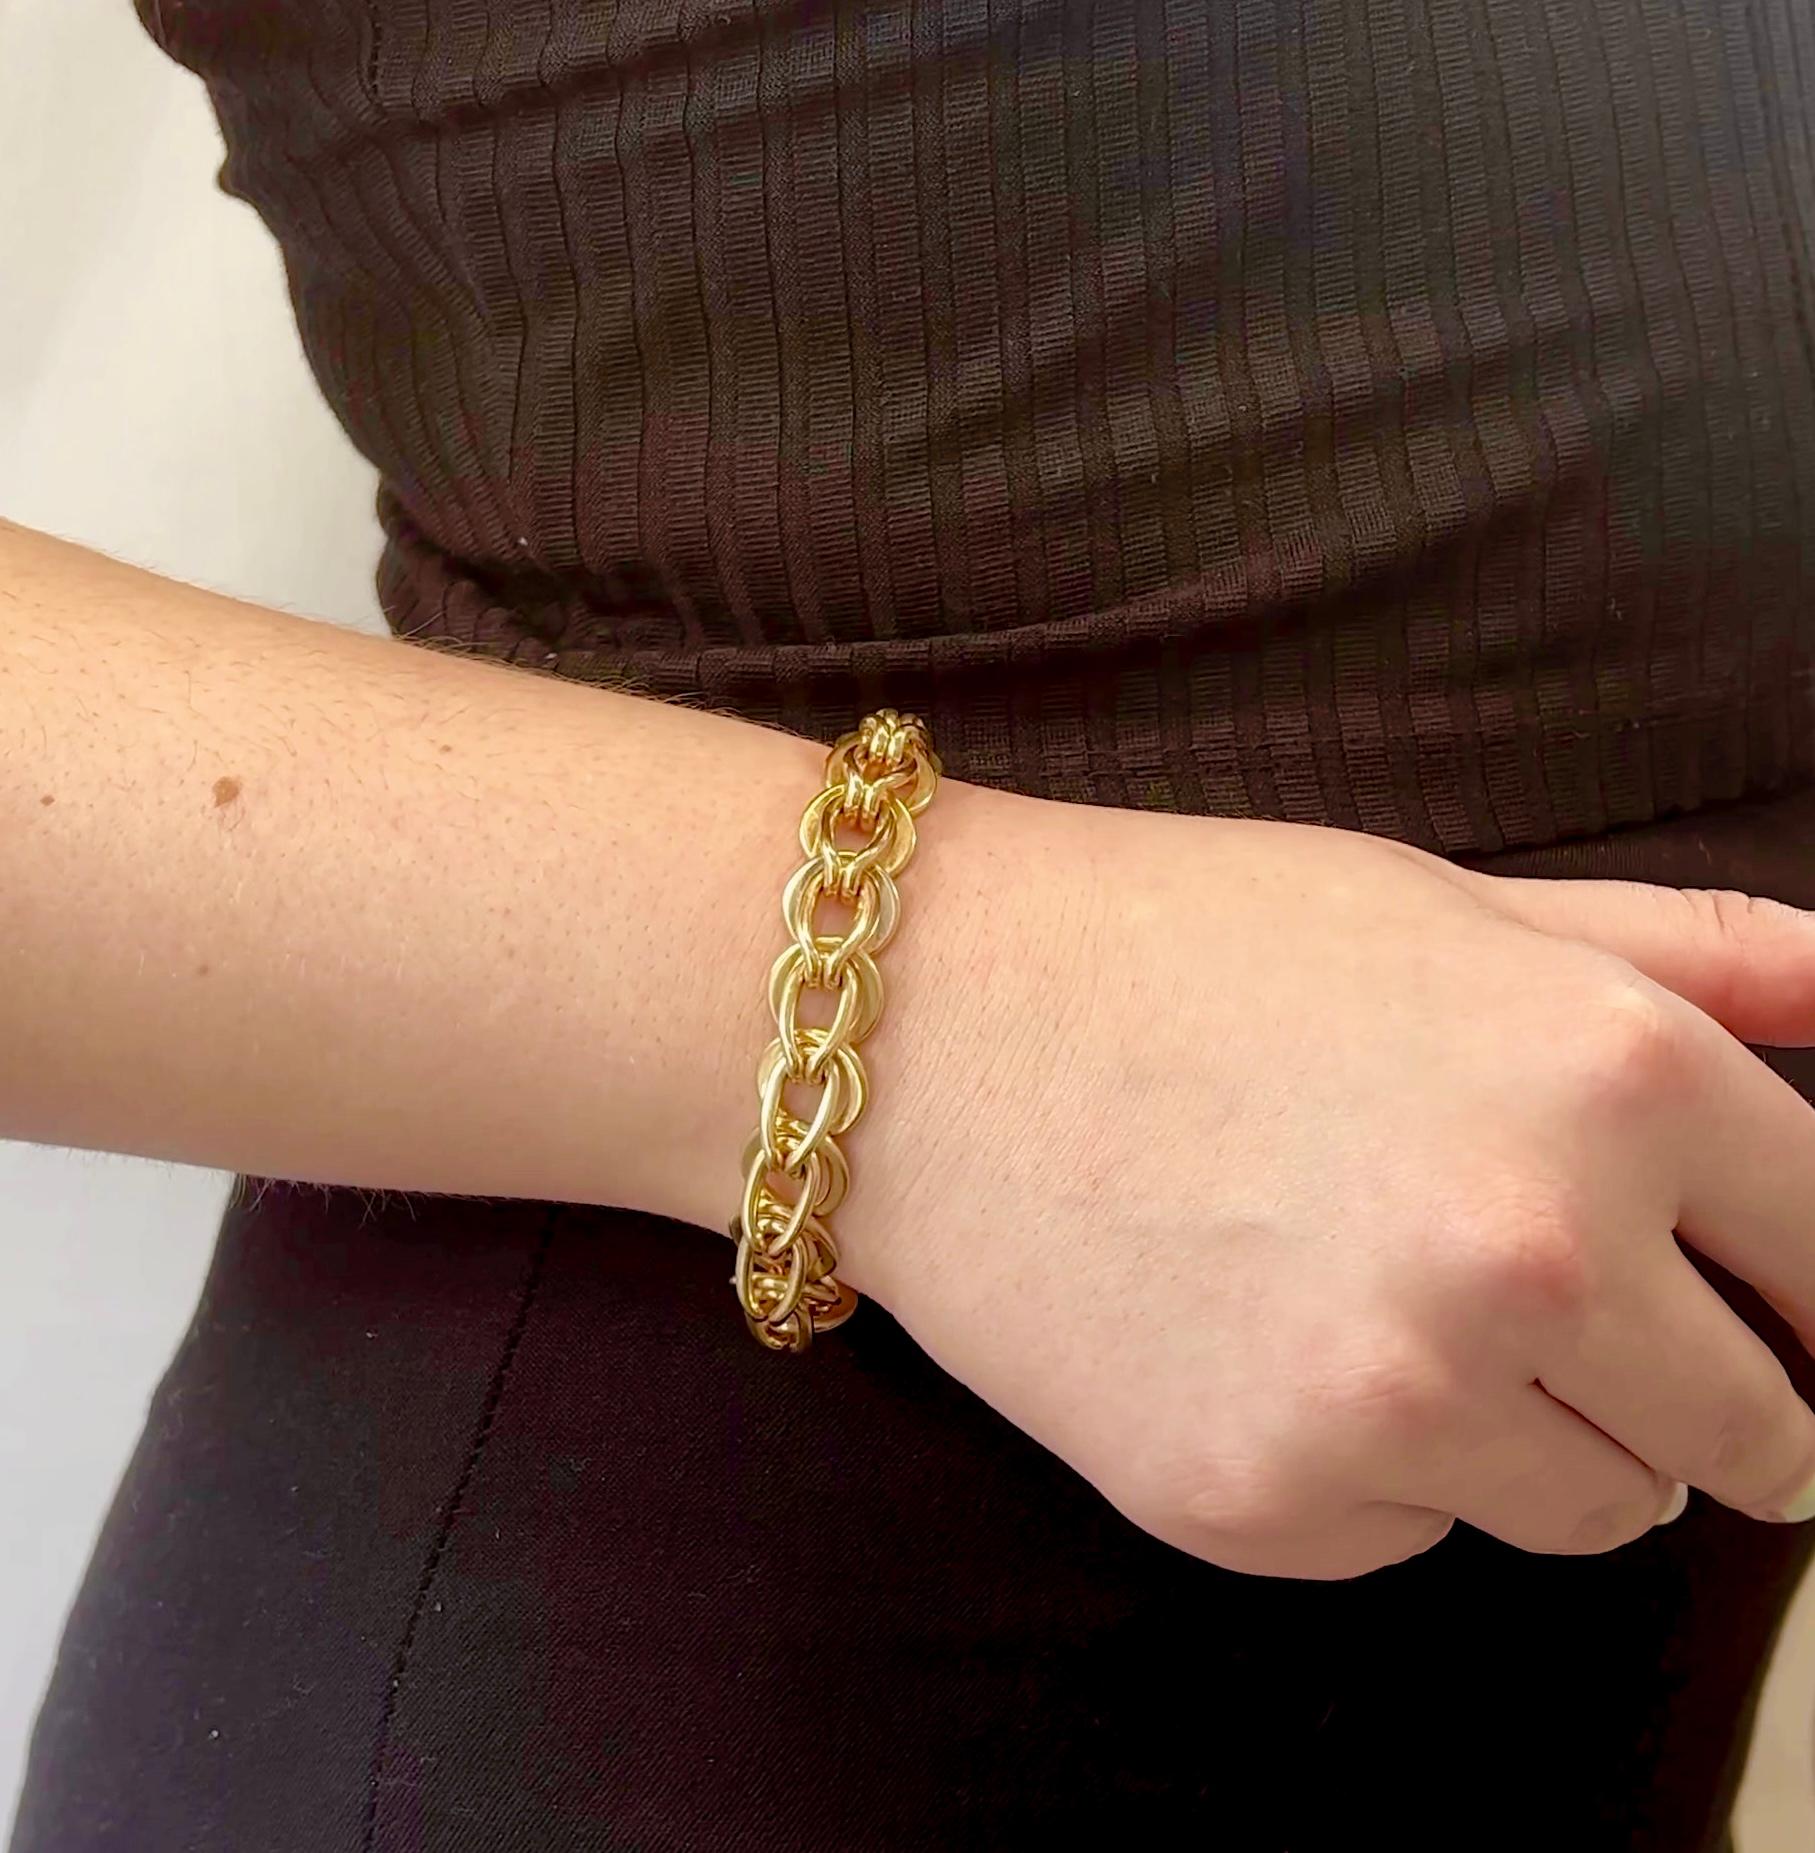 One Vintage Tiffany & Co. Gold Bracelet. Crafted in 14 karat yellow gold, signed Tiffany & Co., with purity mark. Circa 1960s. The bracelet measures 7 inches in length. 

About this Item: This Vintage Tiffany & Co. Bracelet is symbolic of the style